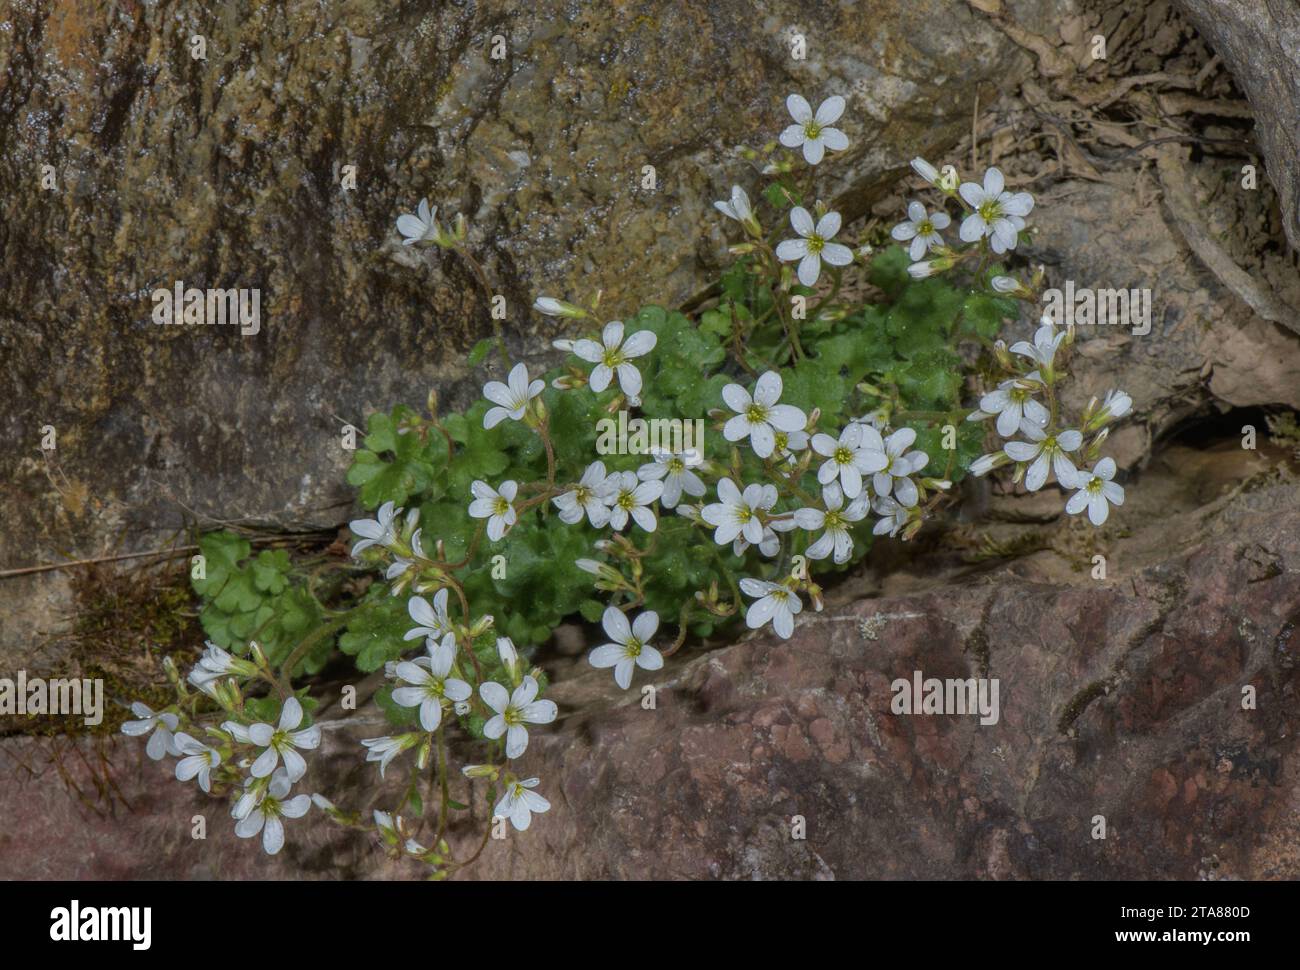 Meadow Saxifrage, Saxifraga granulata, in flower in clump in rock crevice, Pyrenees. Stock Photo